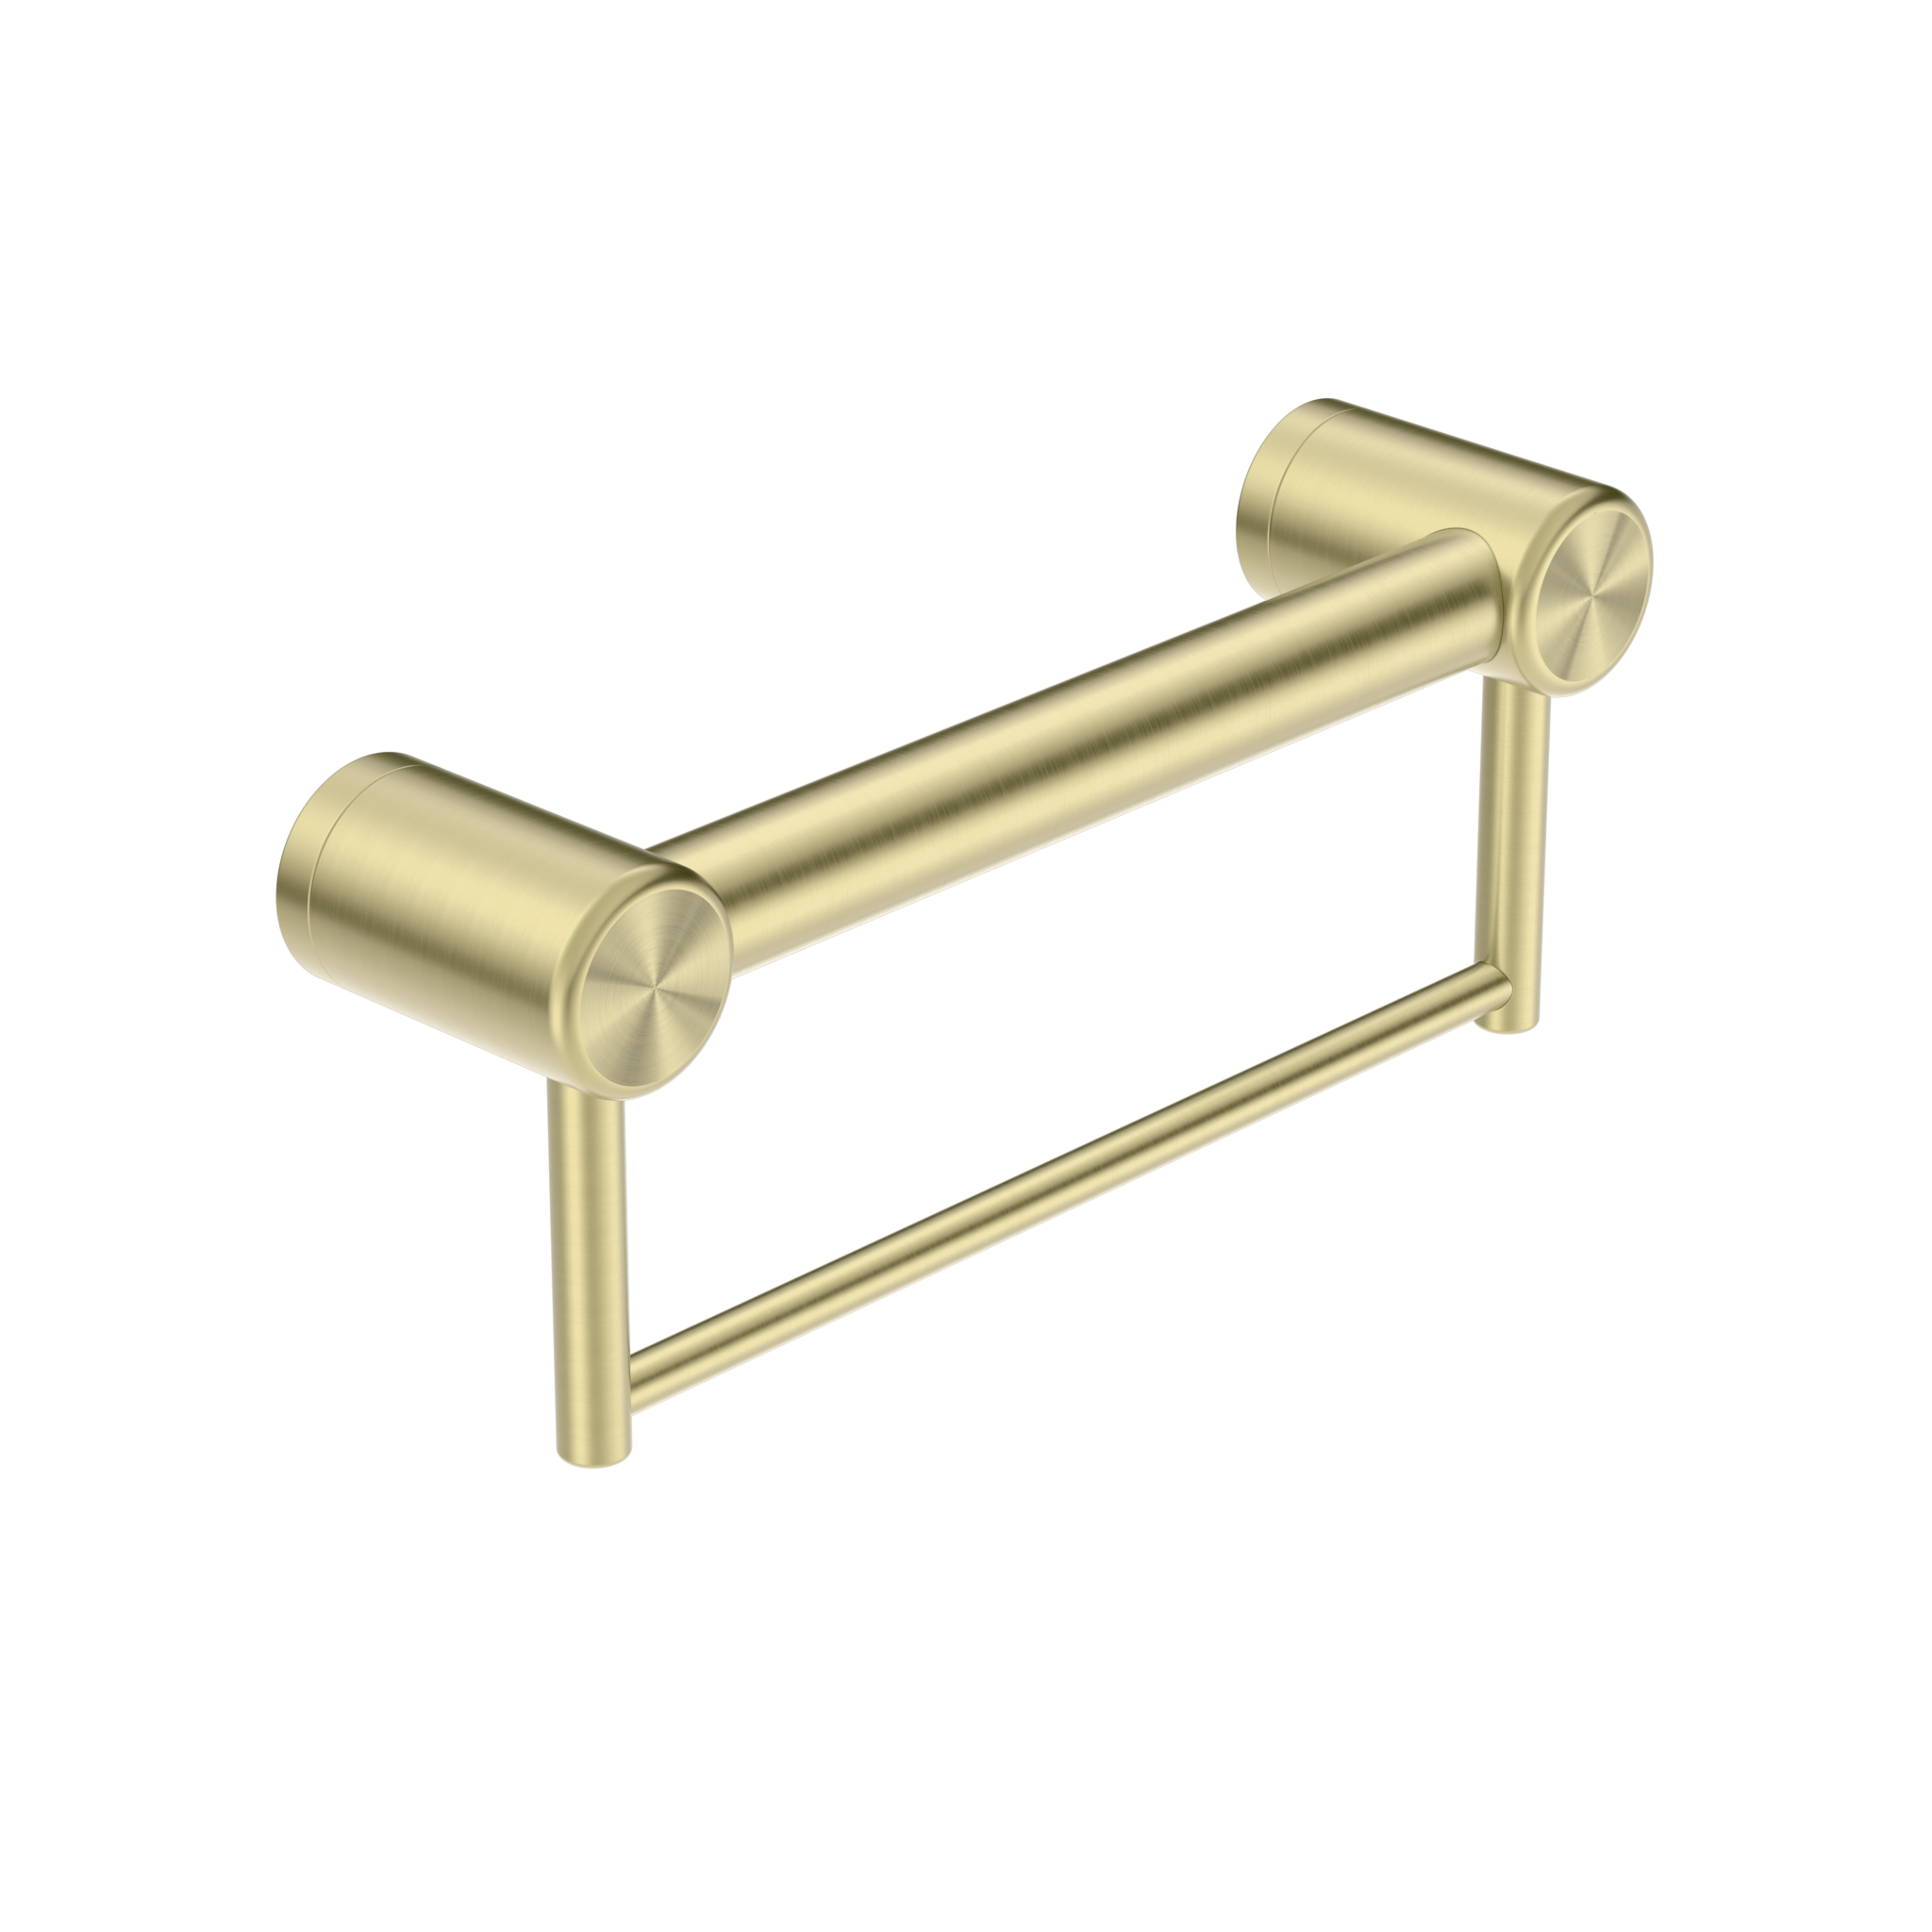 CALIBRE MECCA 32MM GRAB RAIL WITH TOWEL HOLDER 300MM BRUSHED GOLD